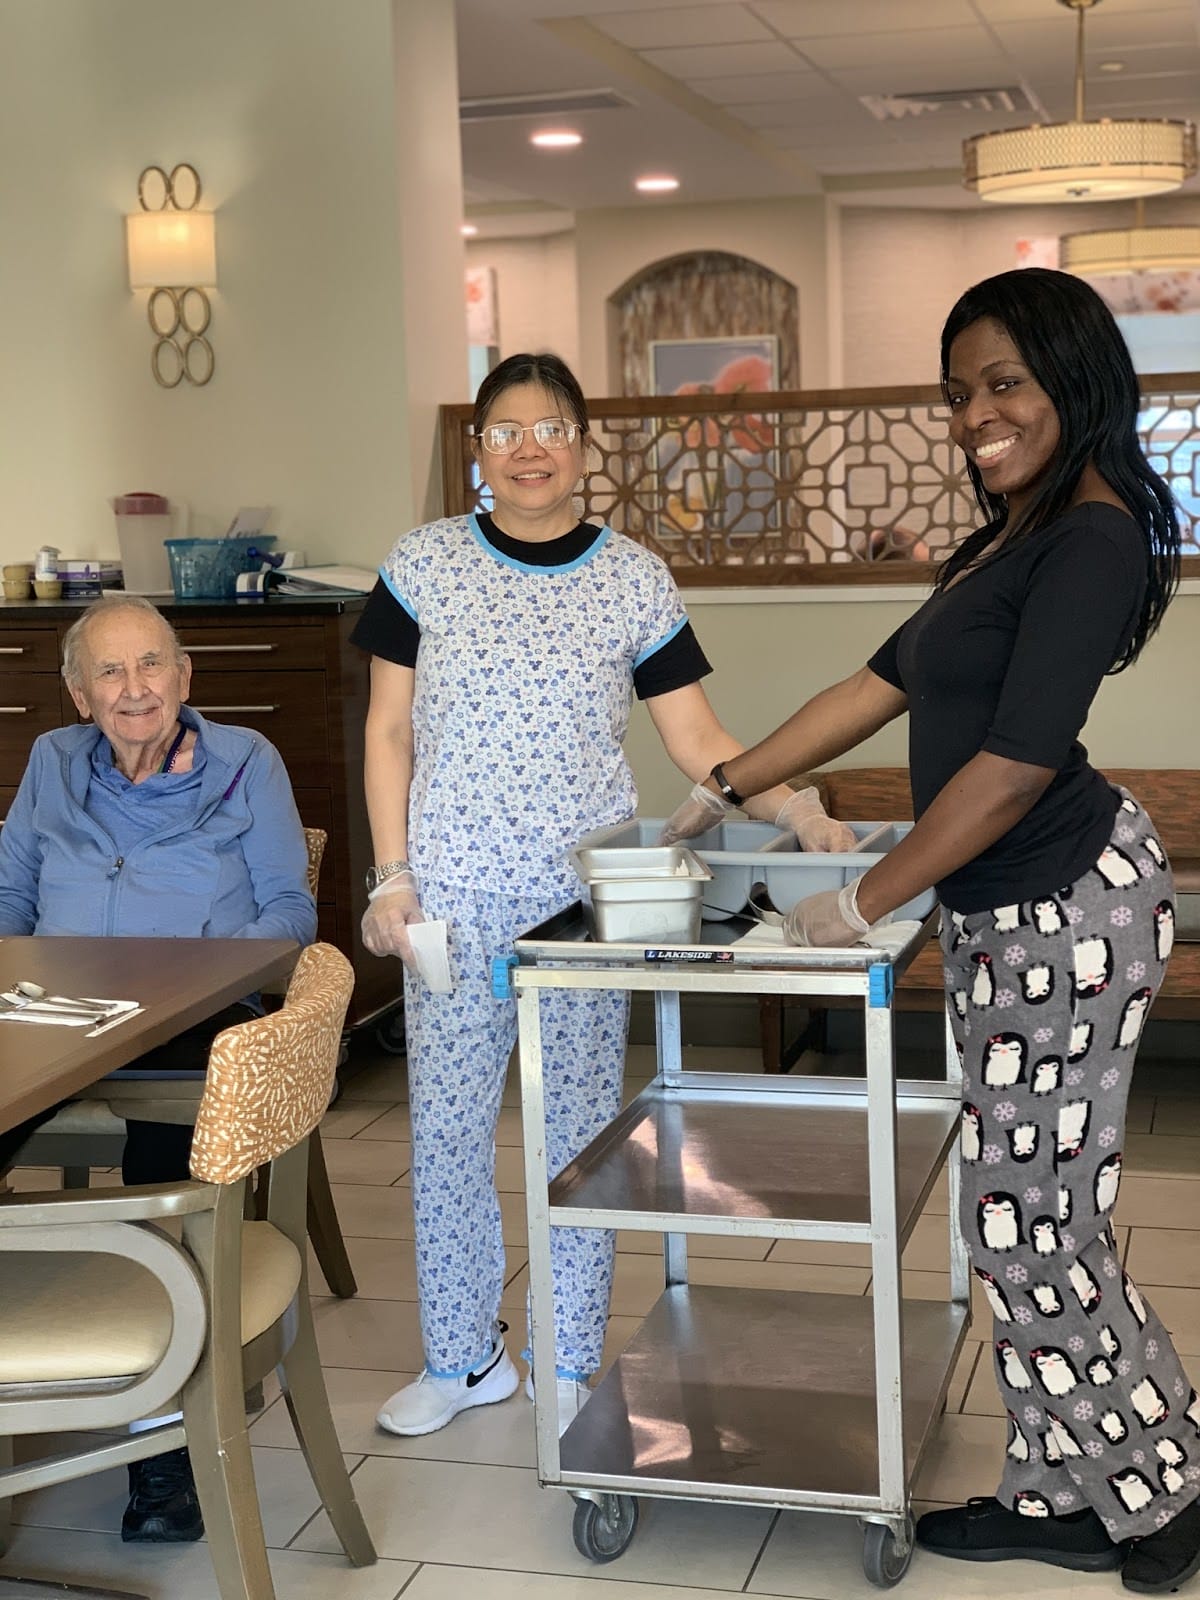 An elderly gentleman eating in an assisted living facility as two care workers stand by smiling